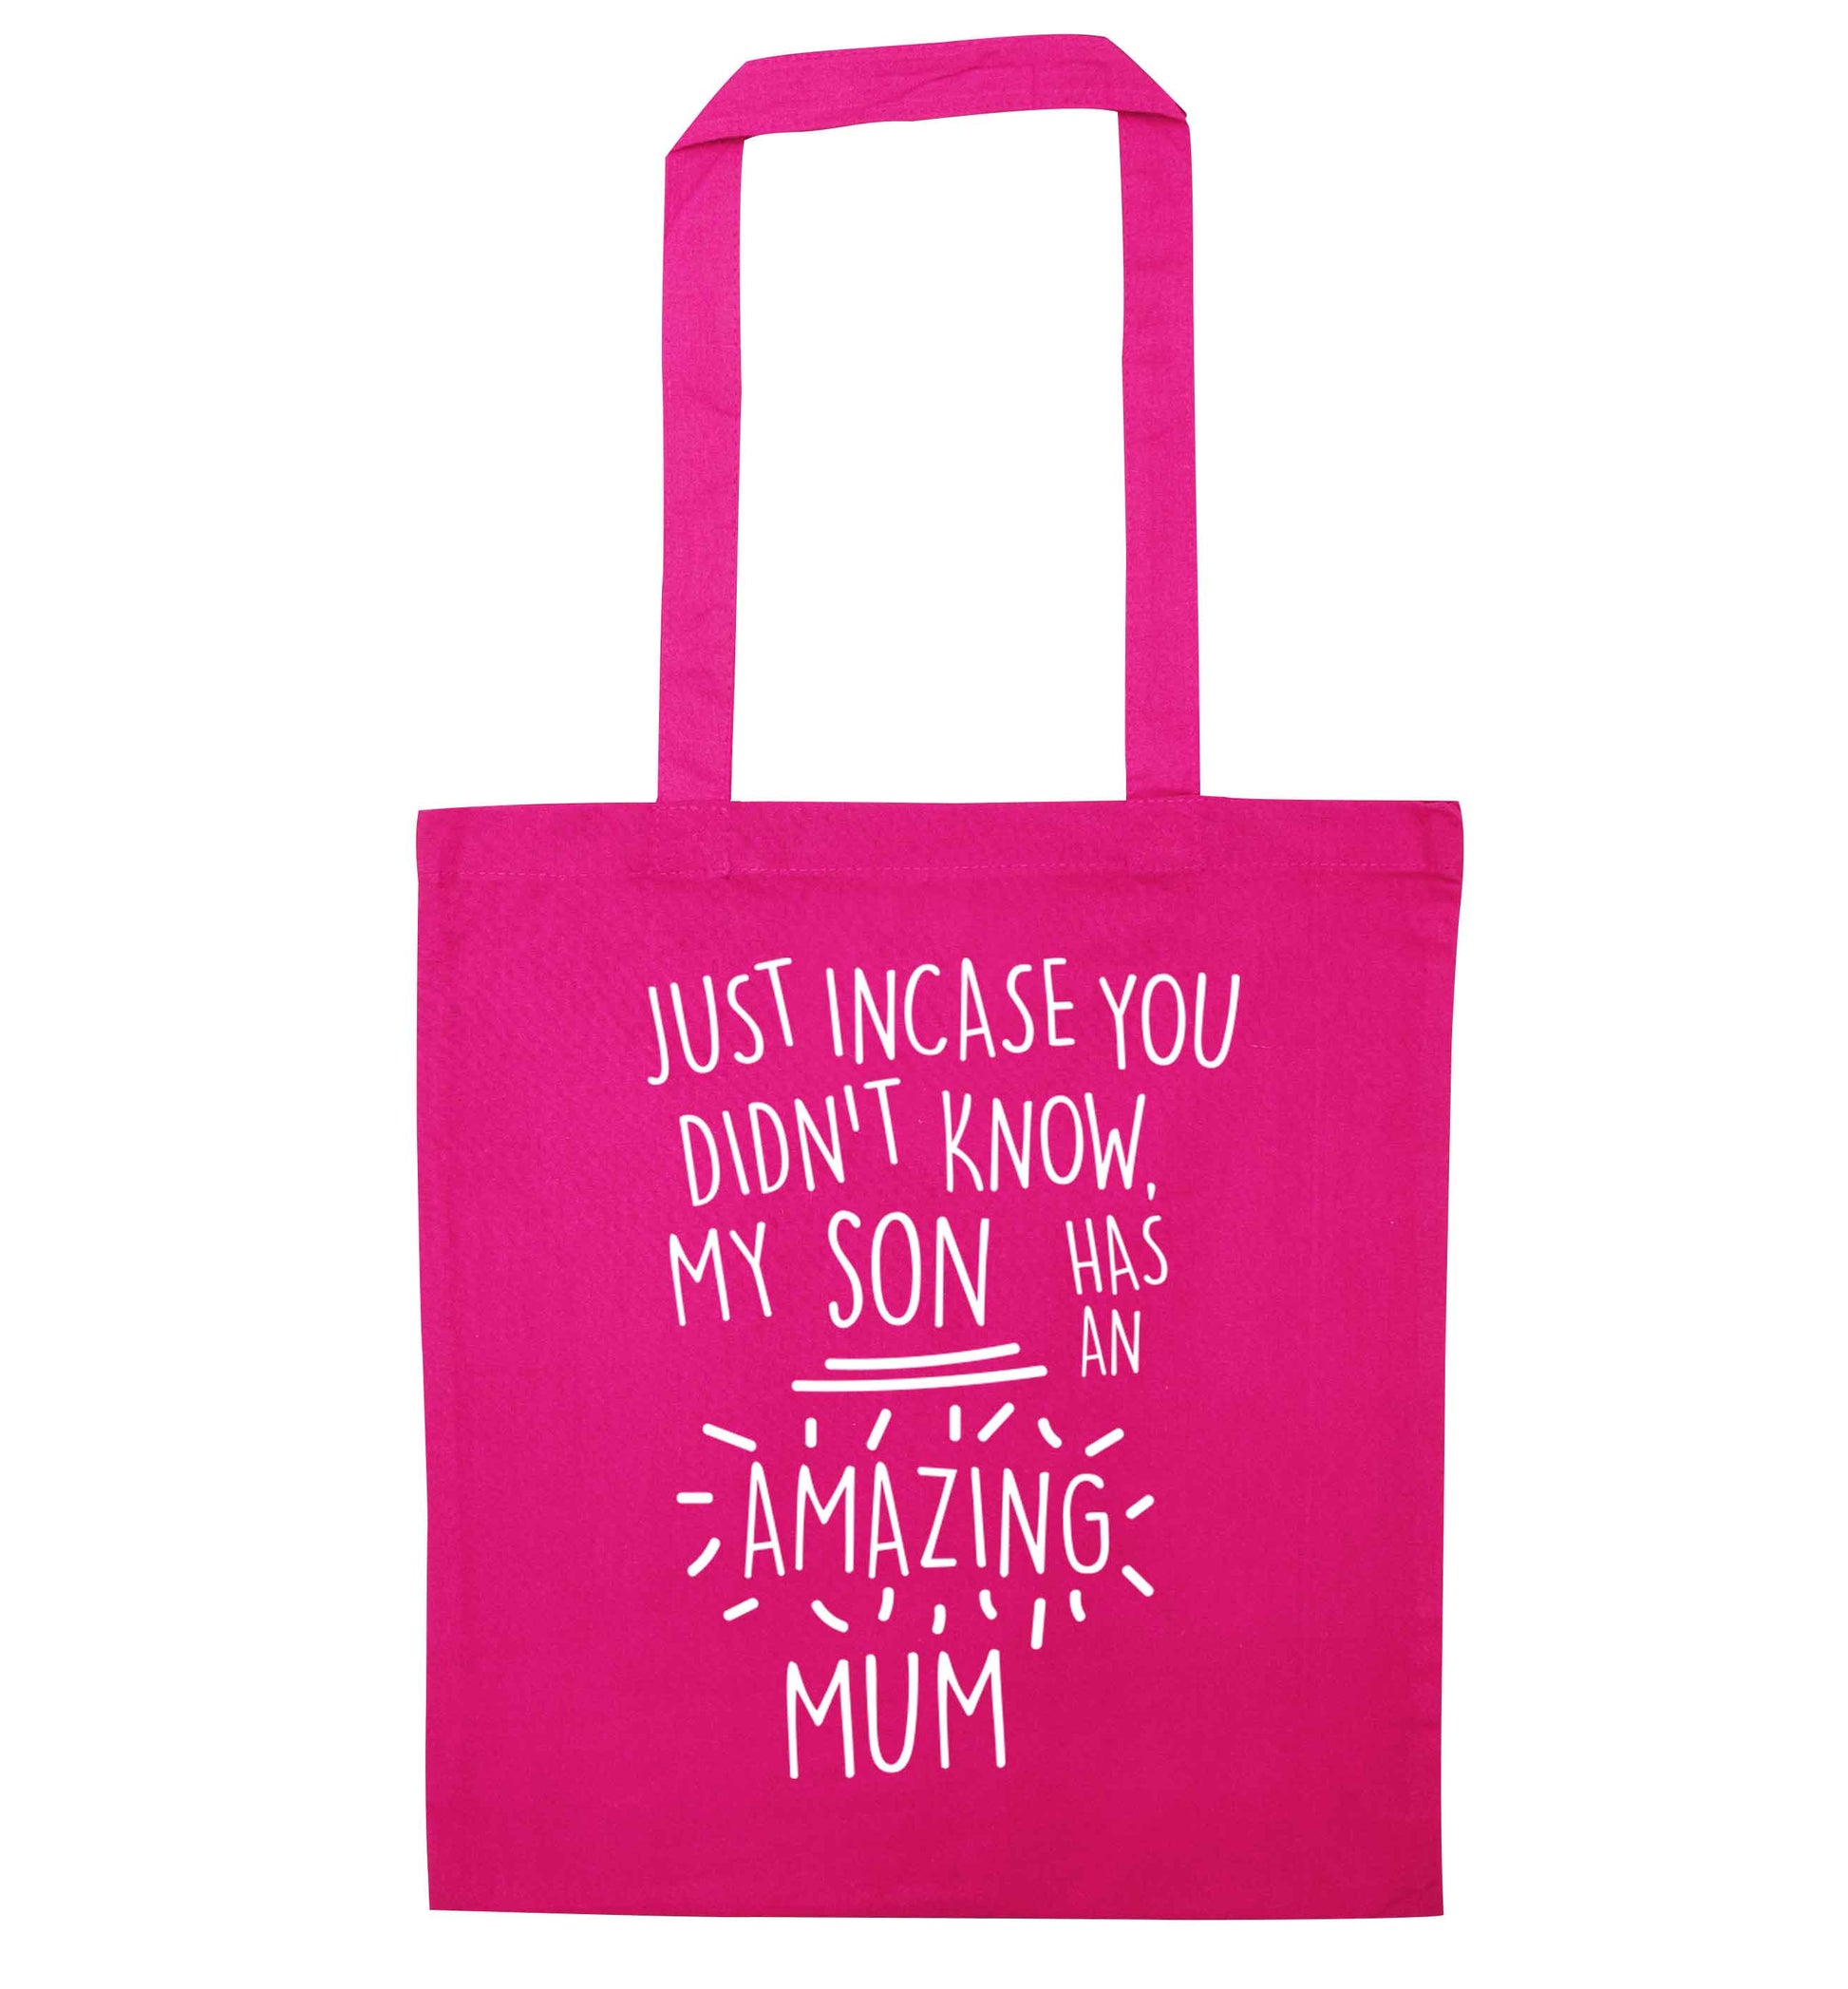 Just incase you didn't know my son has an amazing mum pink tote bag